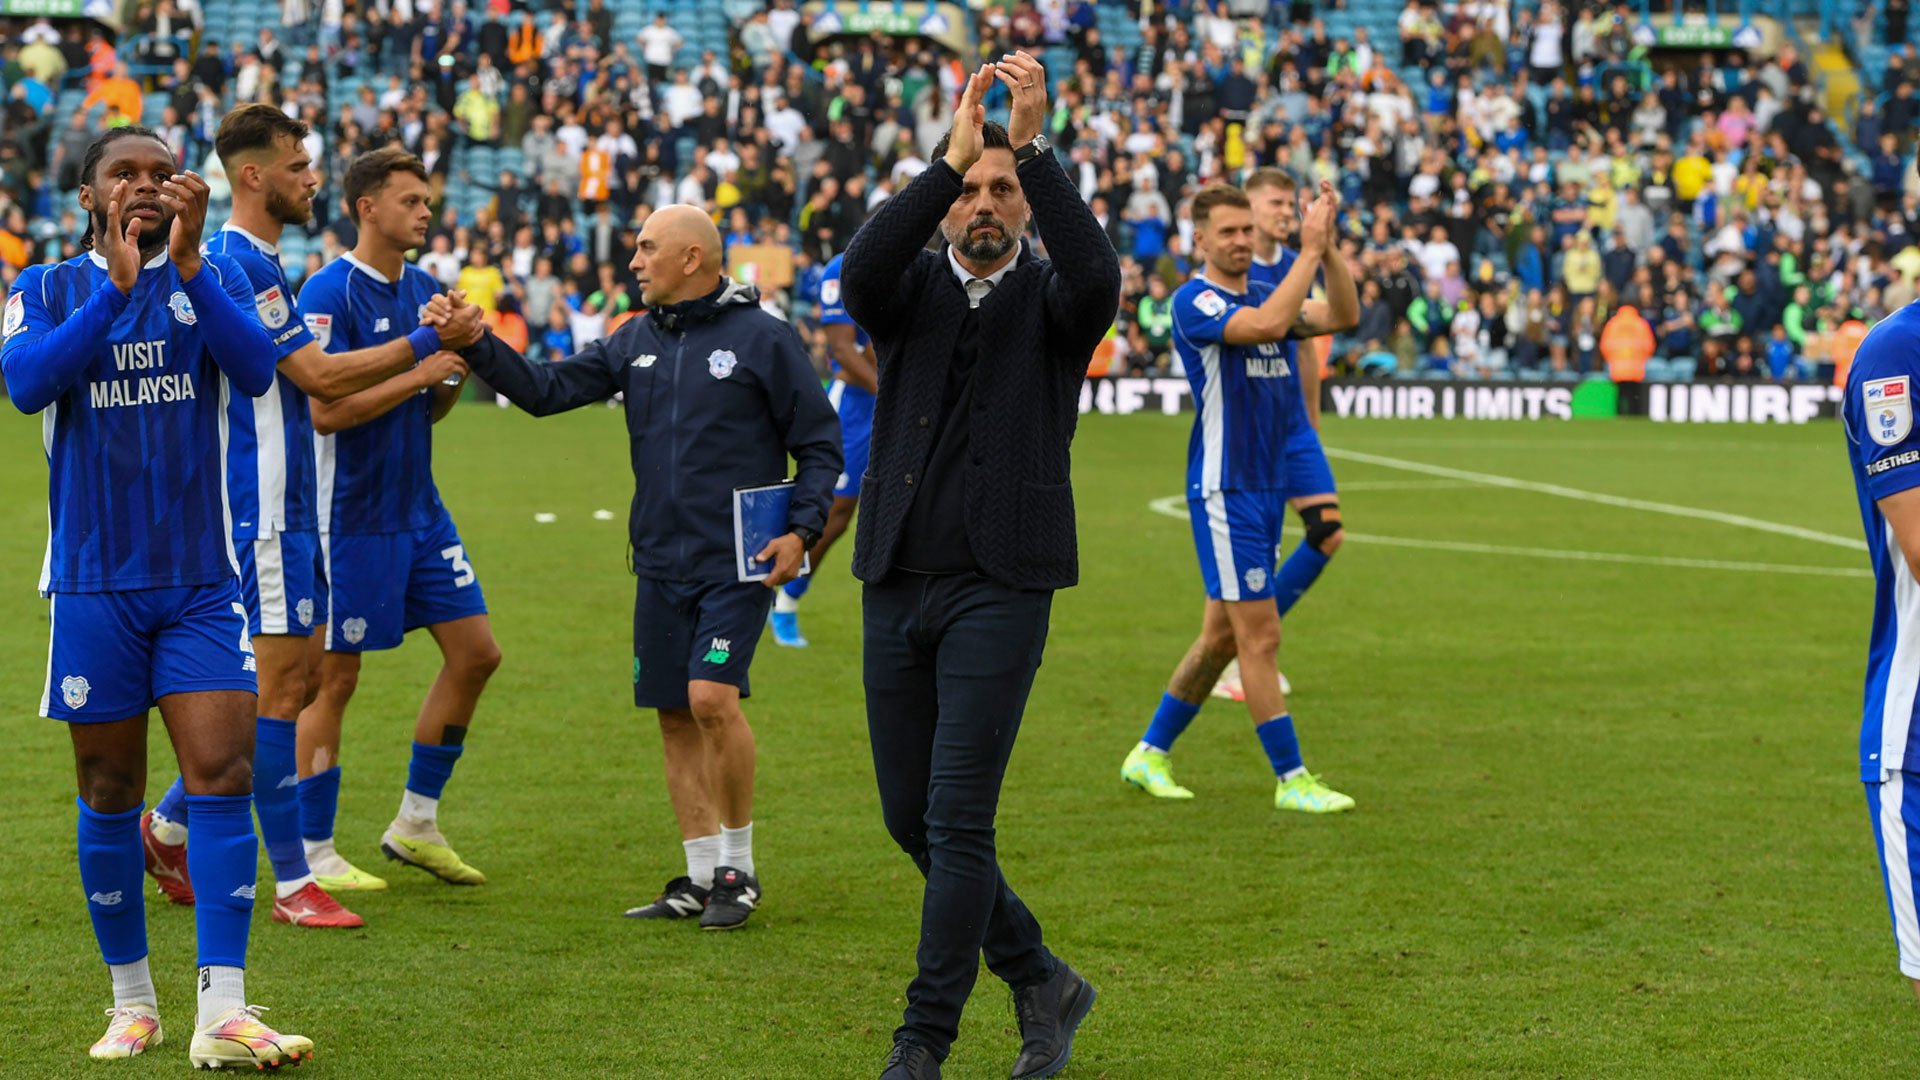 Erol Bulut applauds the fans after Cardiff City's 2-2 draw against Leeds United